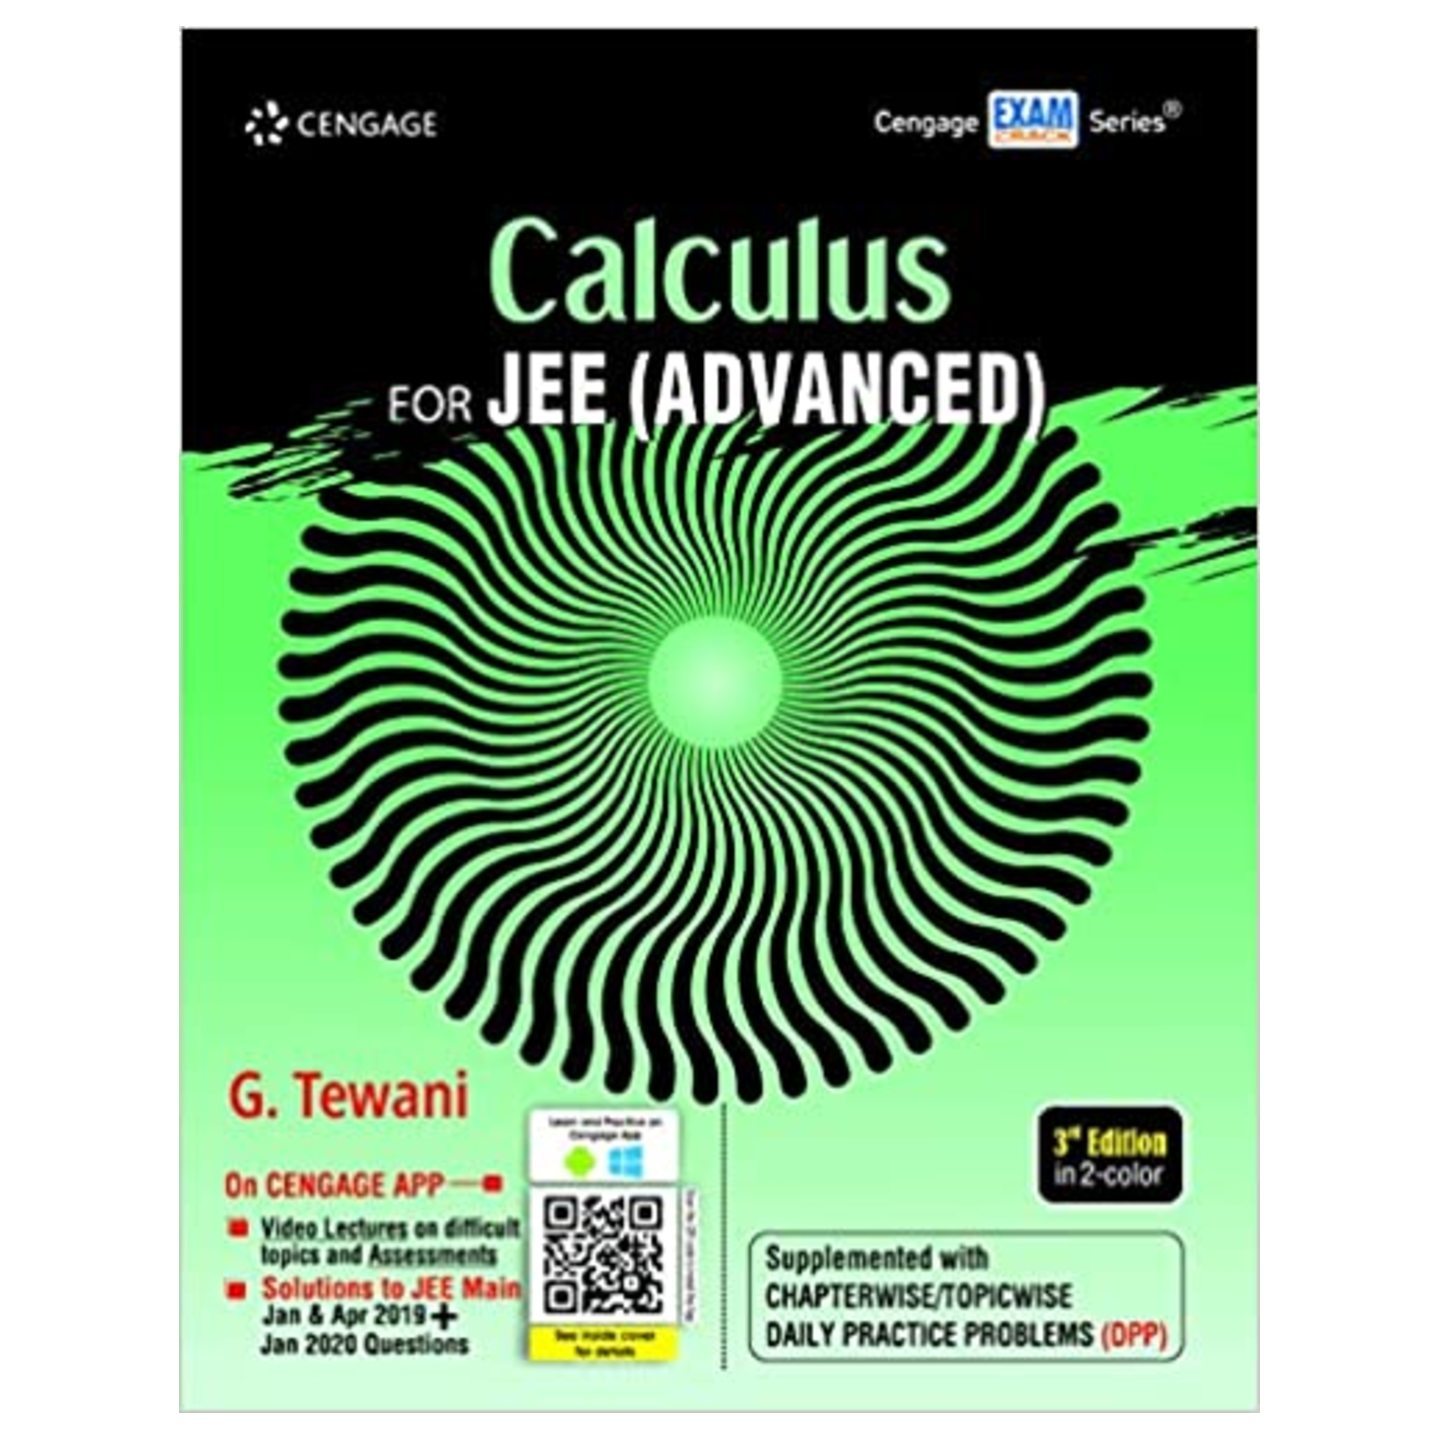 CENGAGE Calculus for JEE Advanced G TEWANI